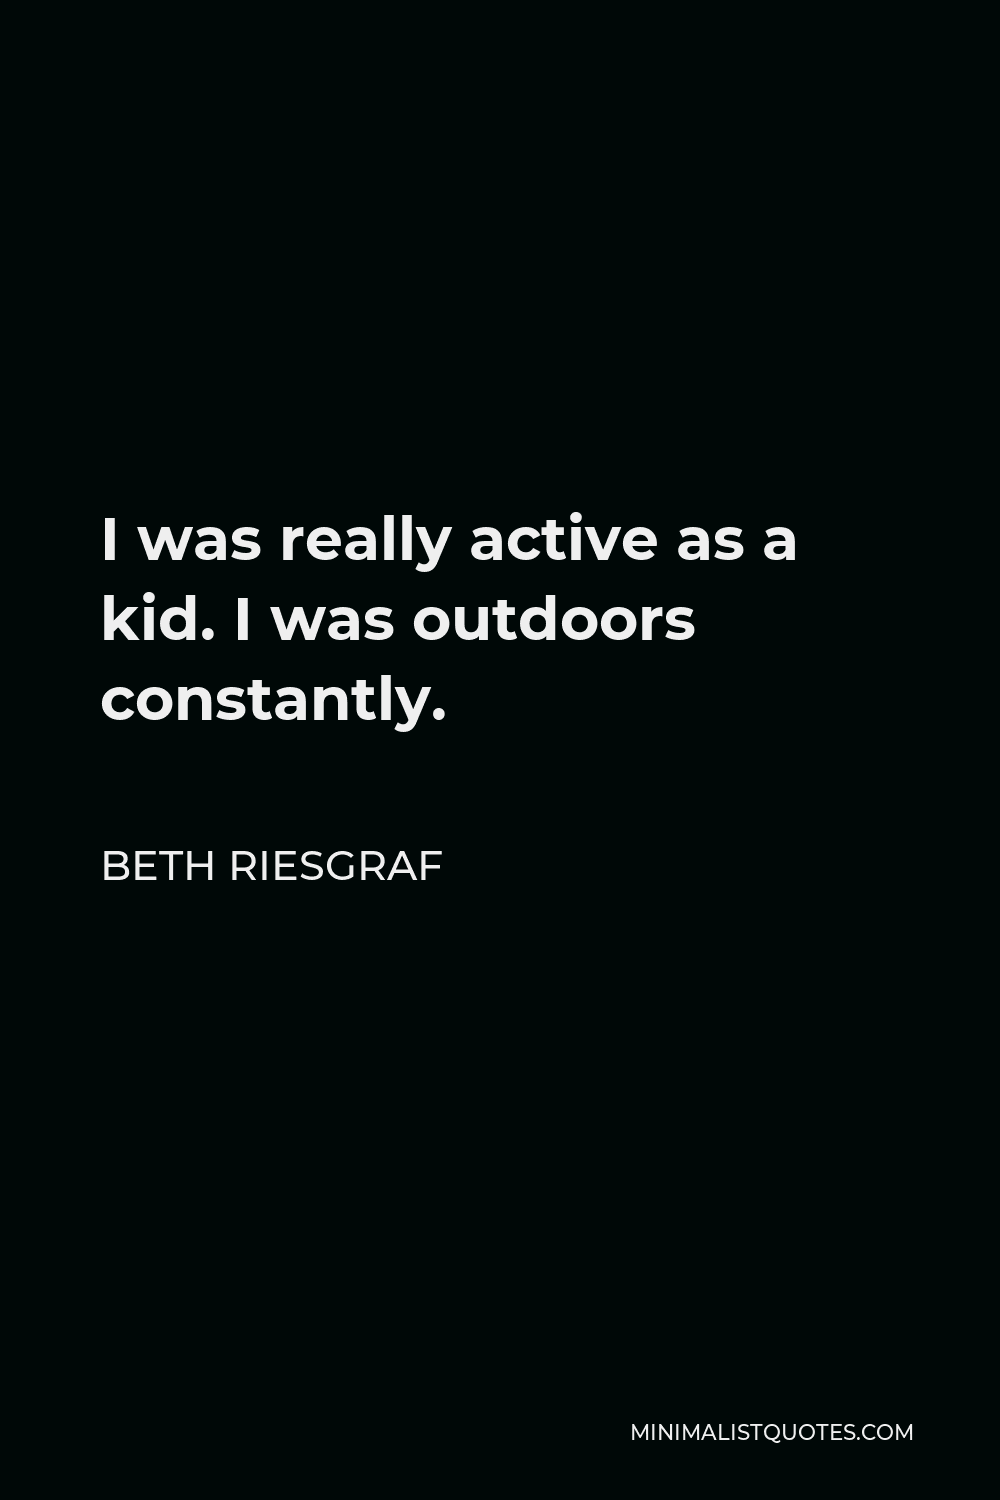 Beth Riesgraf Quote - I was really active as a kid. I was outdoors constantly.